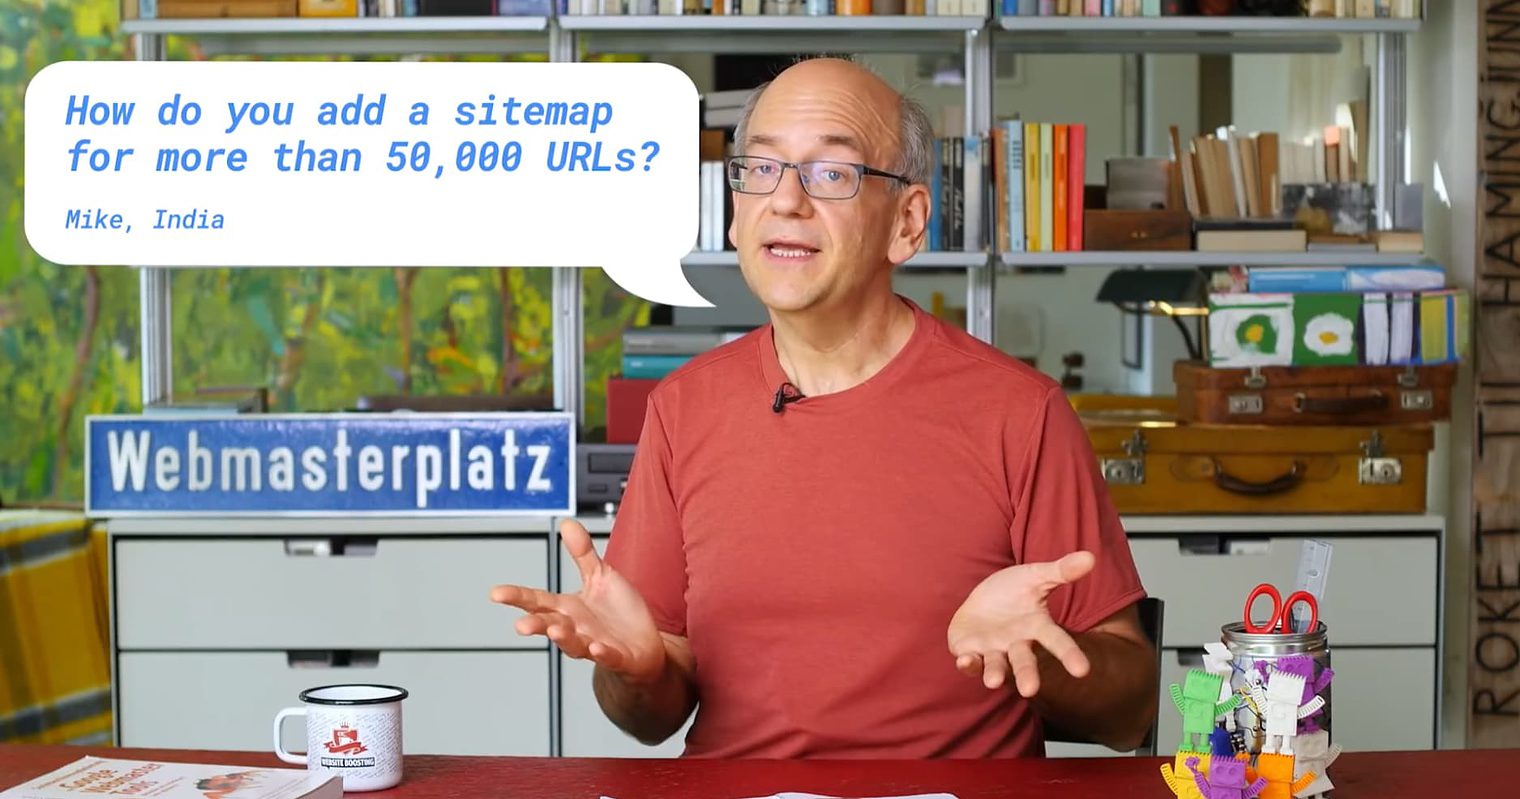 Google’s John Mueller Answers: How to Add Sitemaps for More Than 50,000 URLs